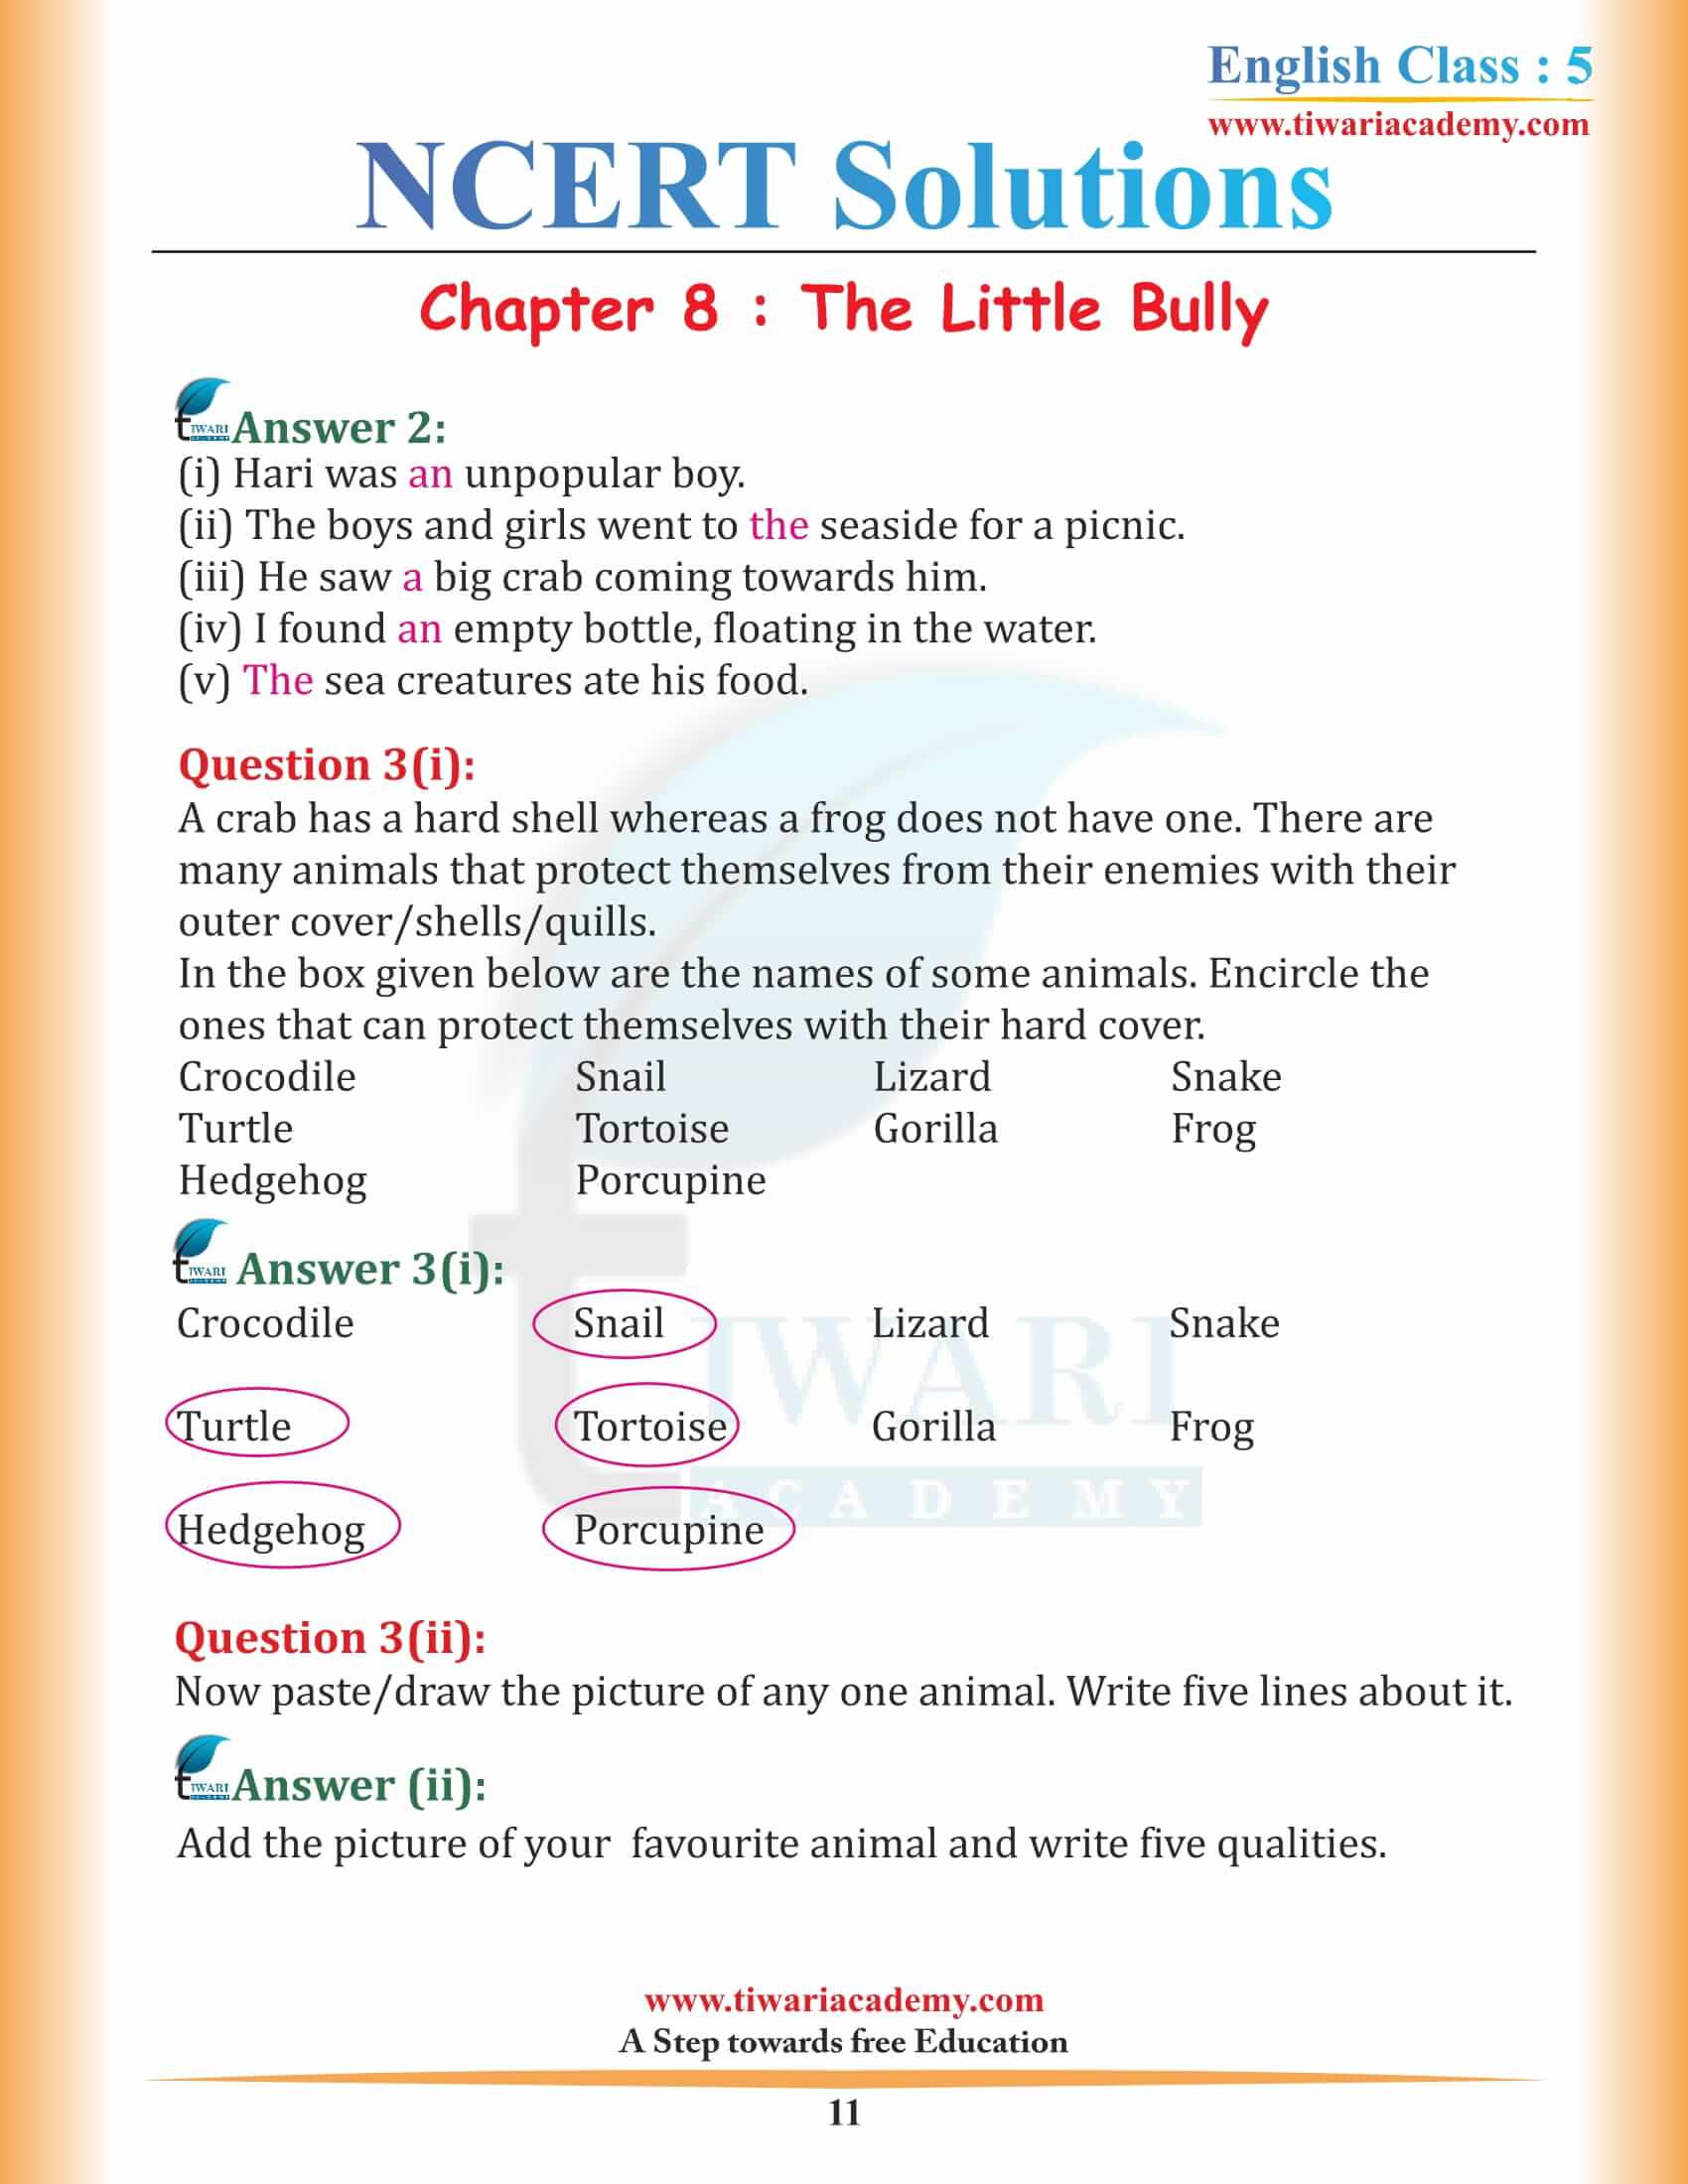 NCERT Solutions for Class 5 English Chapter 8 The Little Bully in PDF free